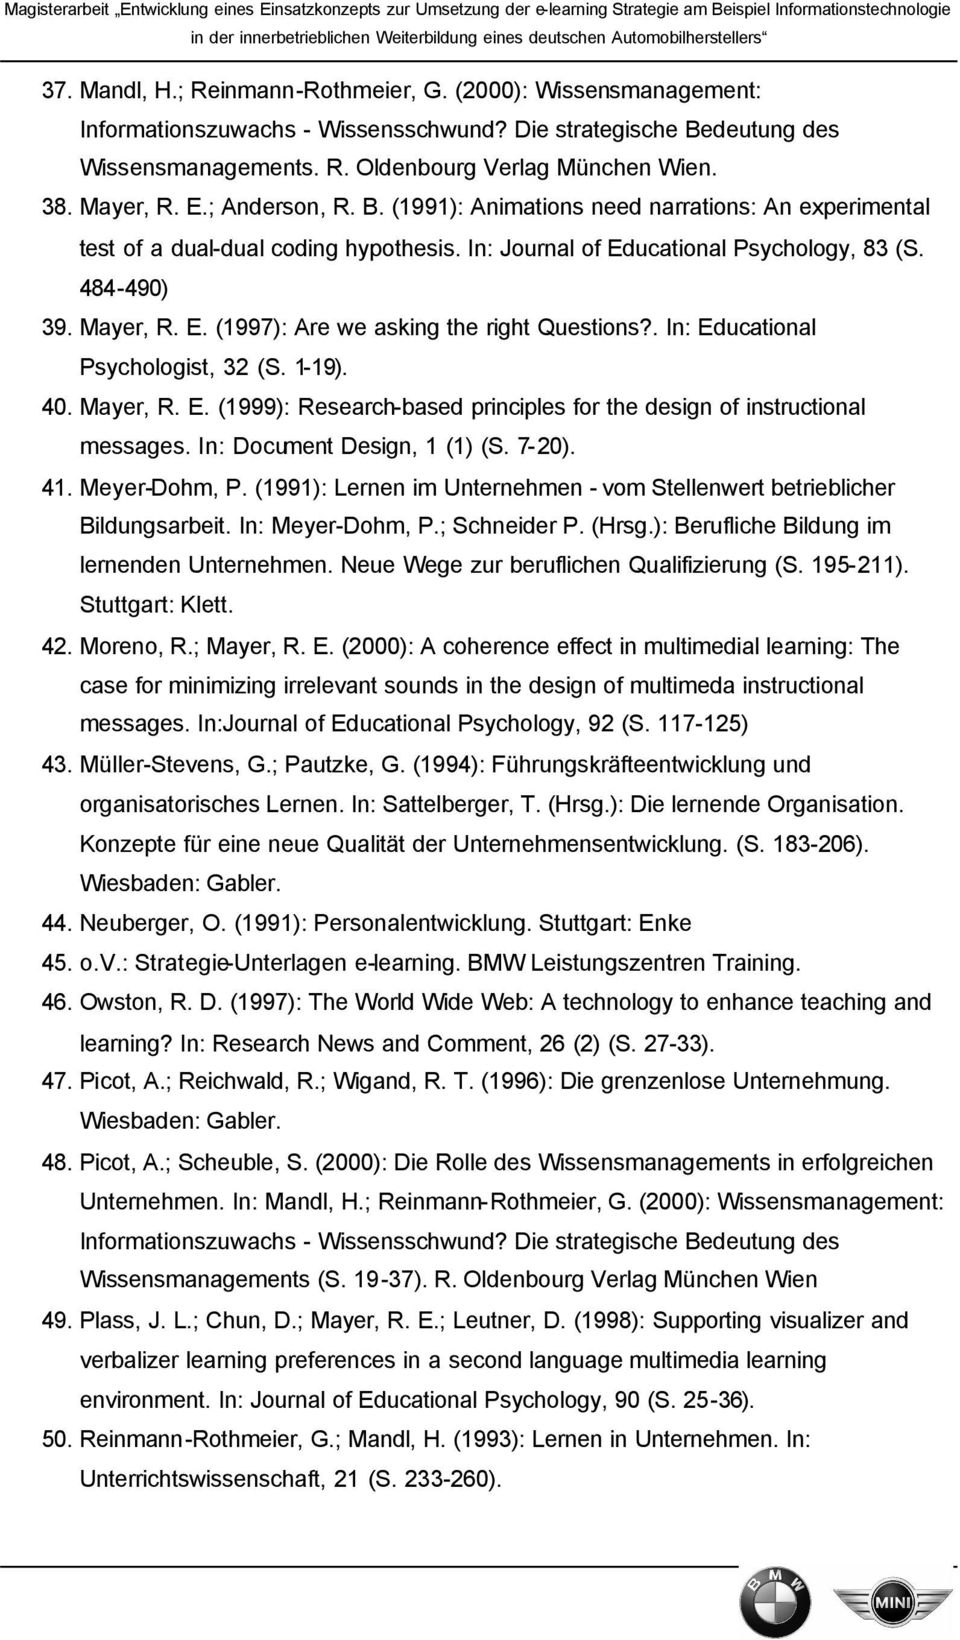 . In: Educational Psychologist, 32 (S. 1-19). 40. Mayer, R. E. (1999): Research-based principles for the design of instructional messages. In: Document Design, 1 (1) (S. 7-20). 41. Meyer-Dohm, P.